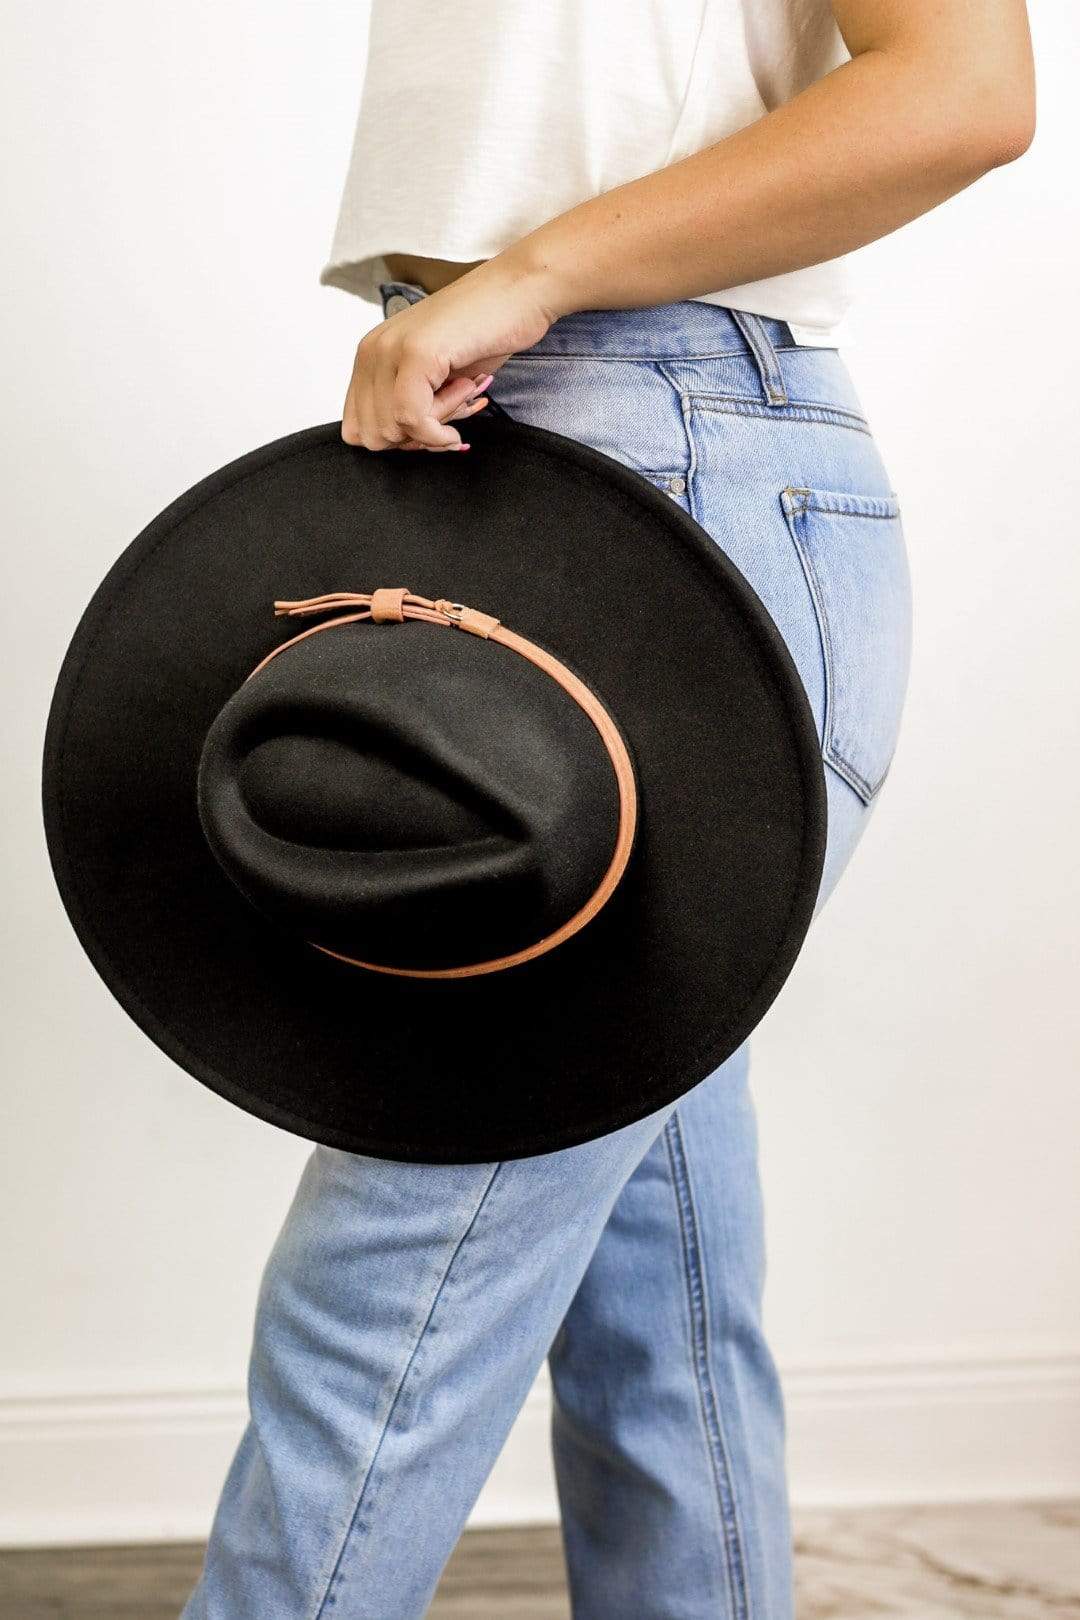 Black Belted Panama Hat - Select Trends Boutique